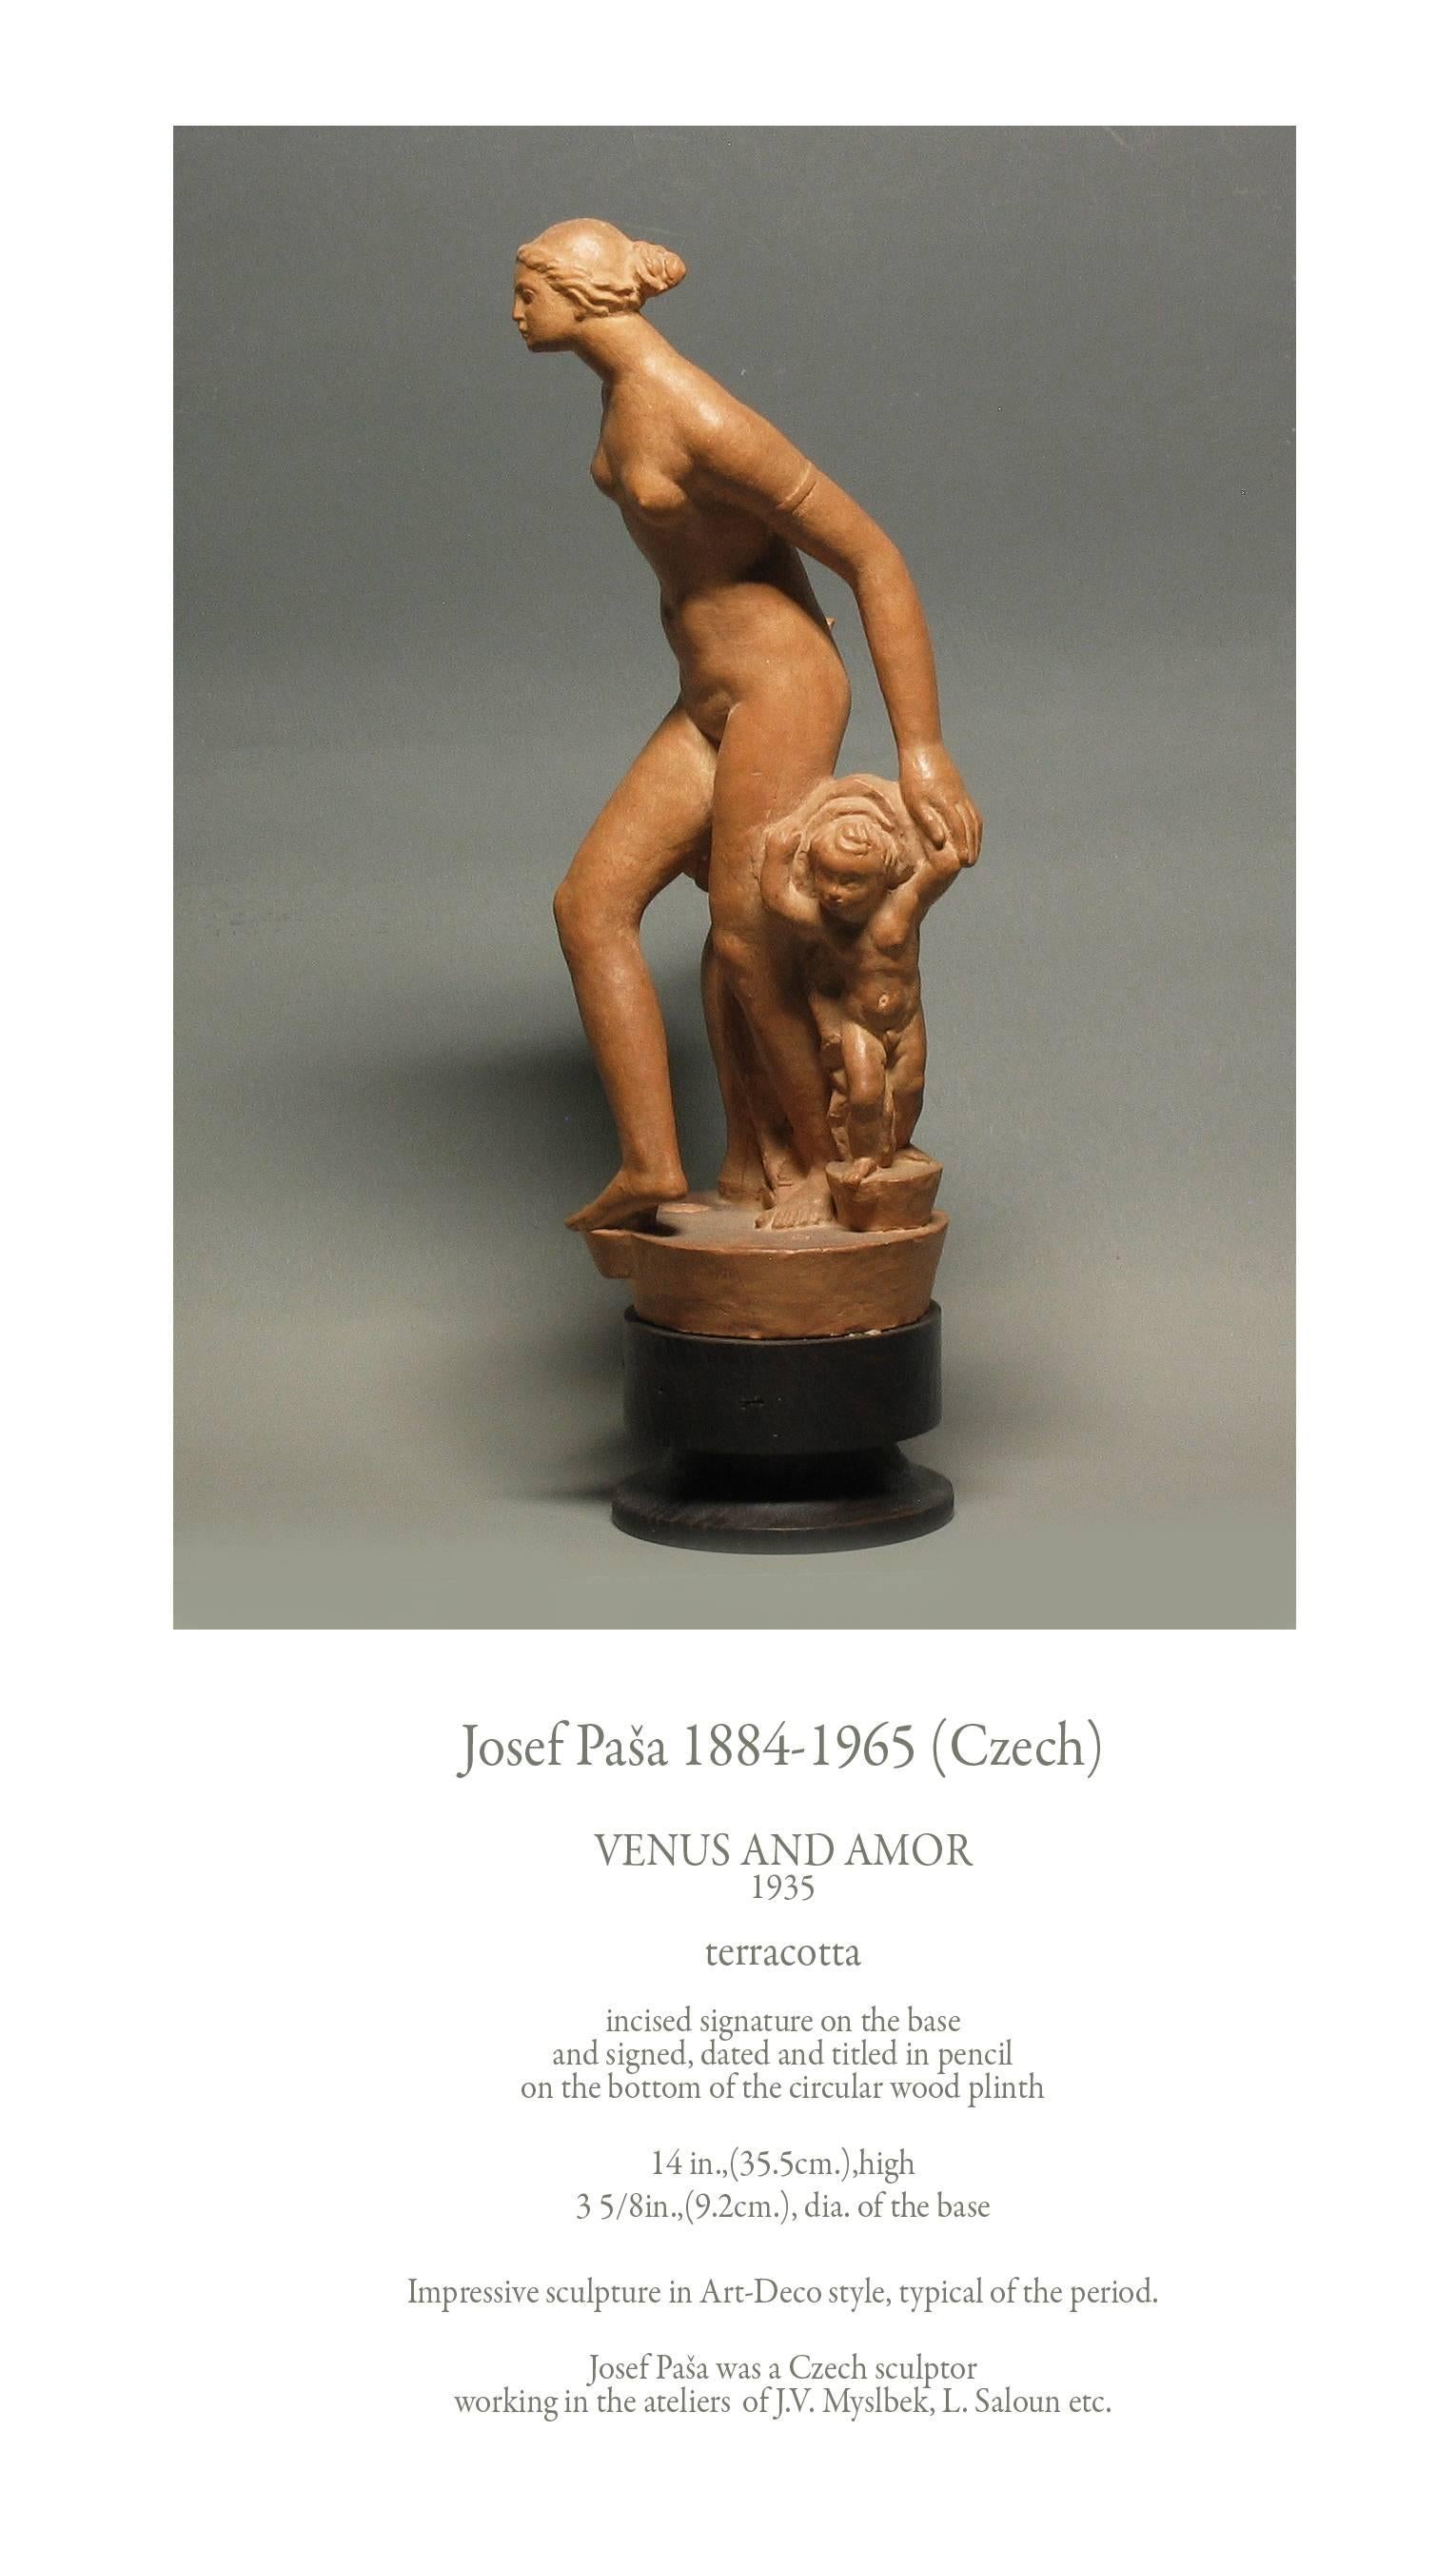 Josef Pasa 1884-1965 (Czech), Titled Venus and Amor 1935, Made of terracotta, Incised signature on the base and signed, dated and titled in pencil on the bottom of the circular wood plinth. The sculpture measures 14"-inches high x 3